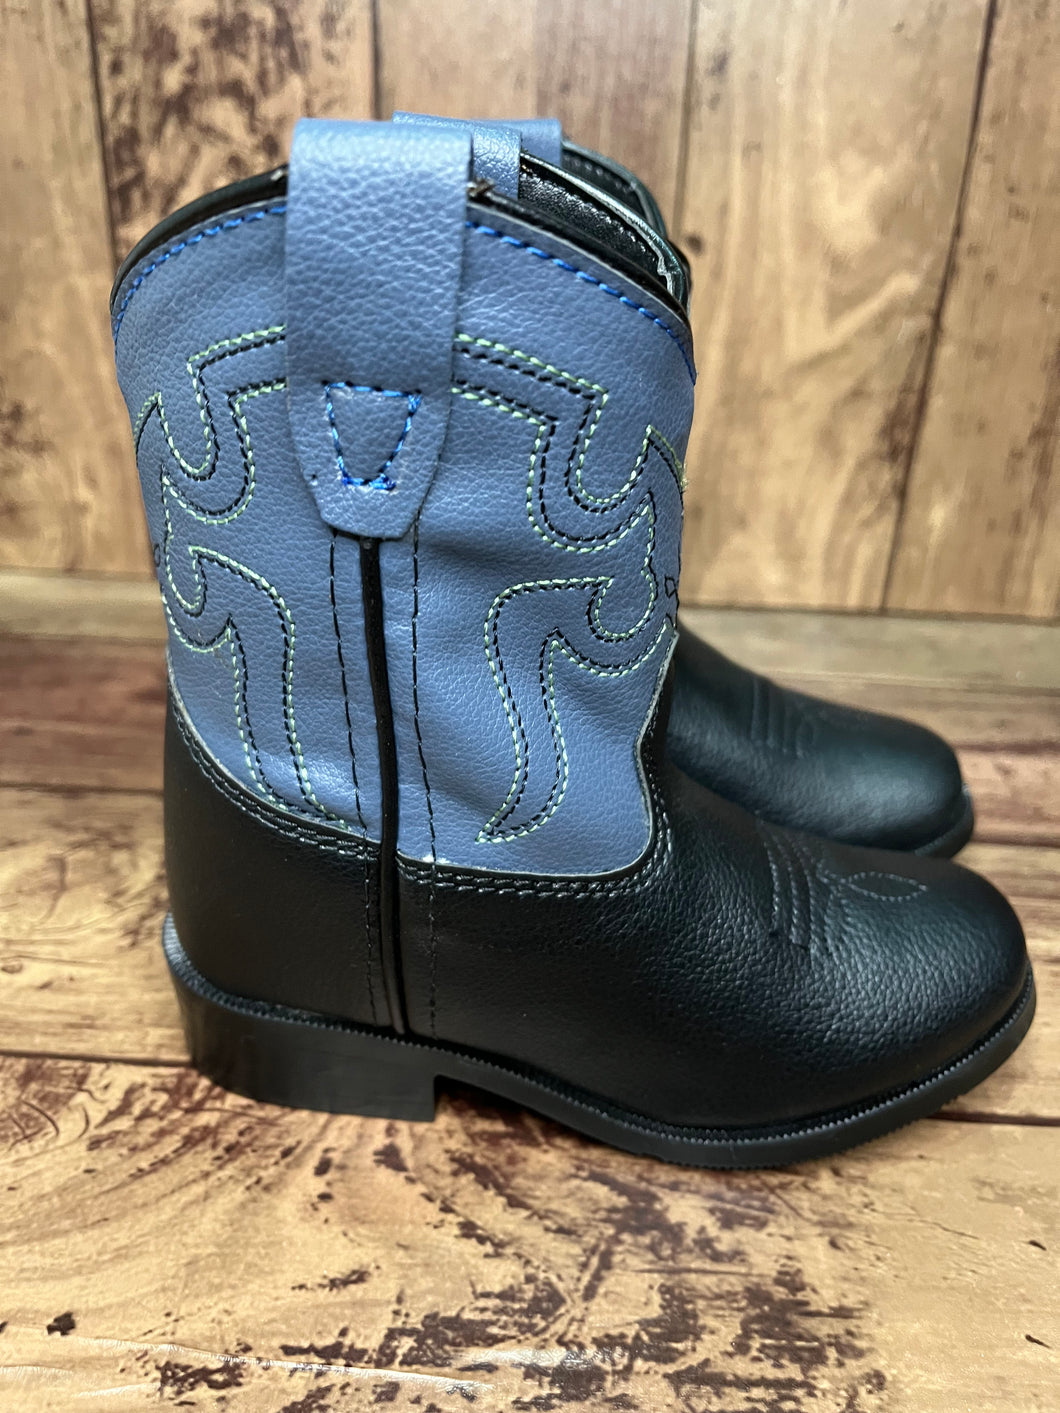 Smoky Mountain Boots 1576T Monterey Blue/Black Western Toddler Boots